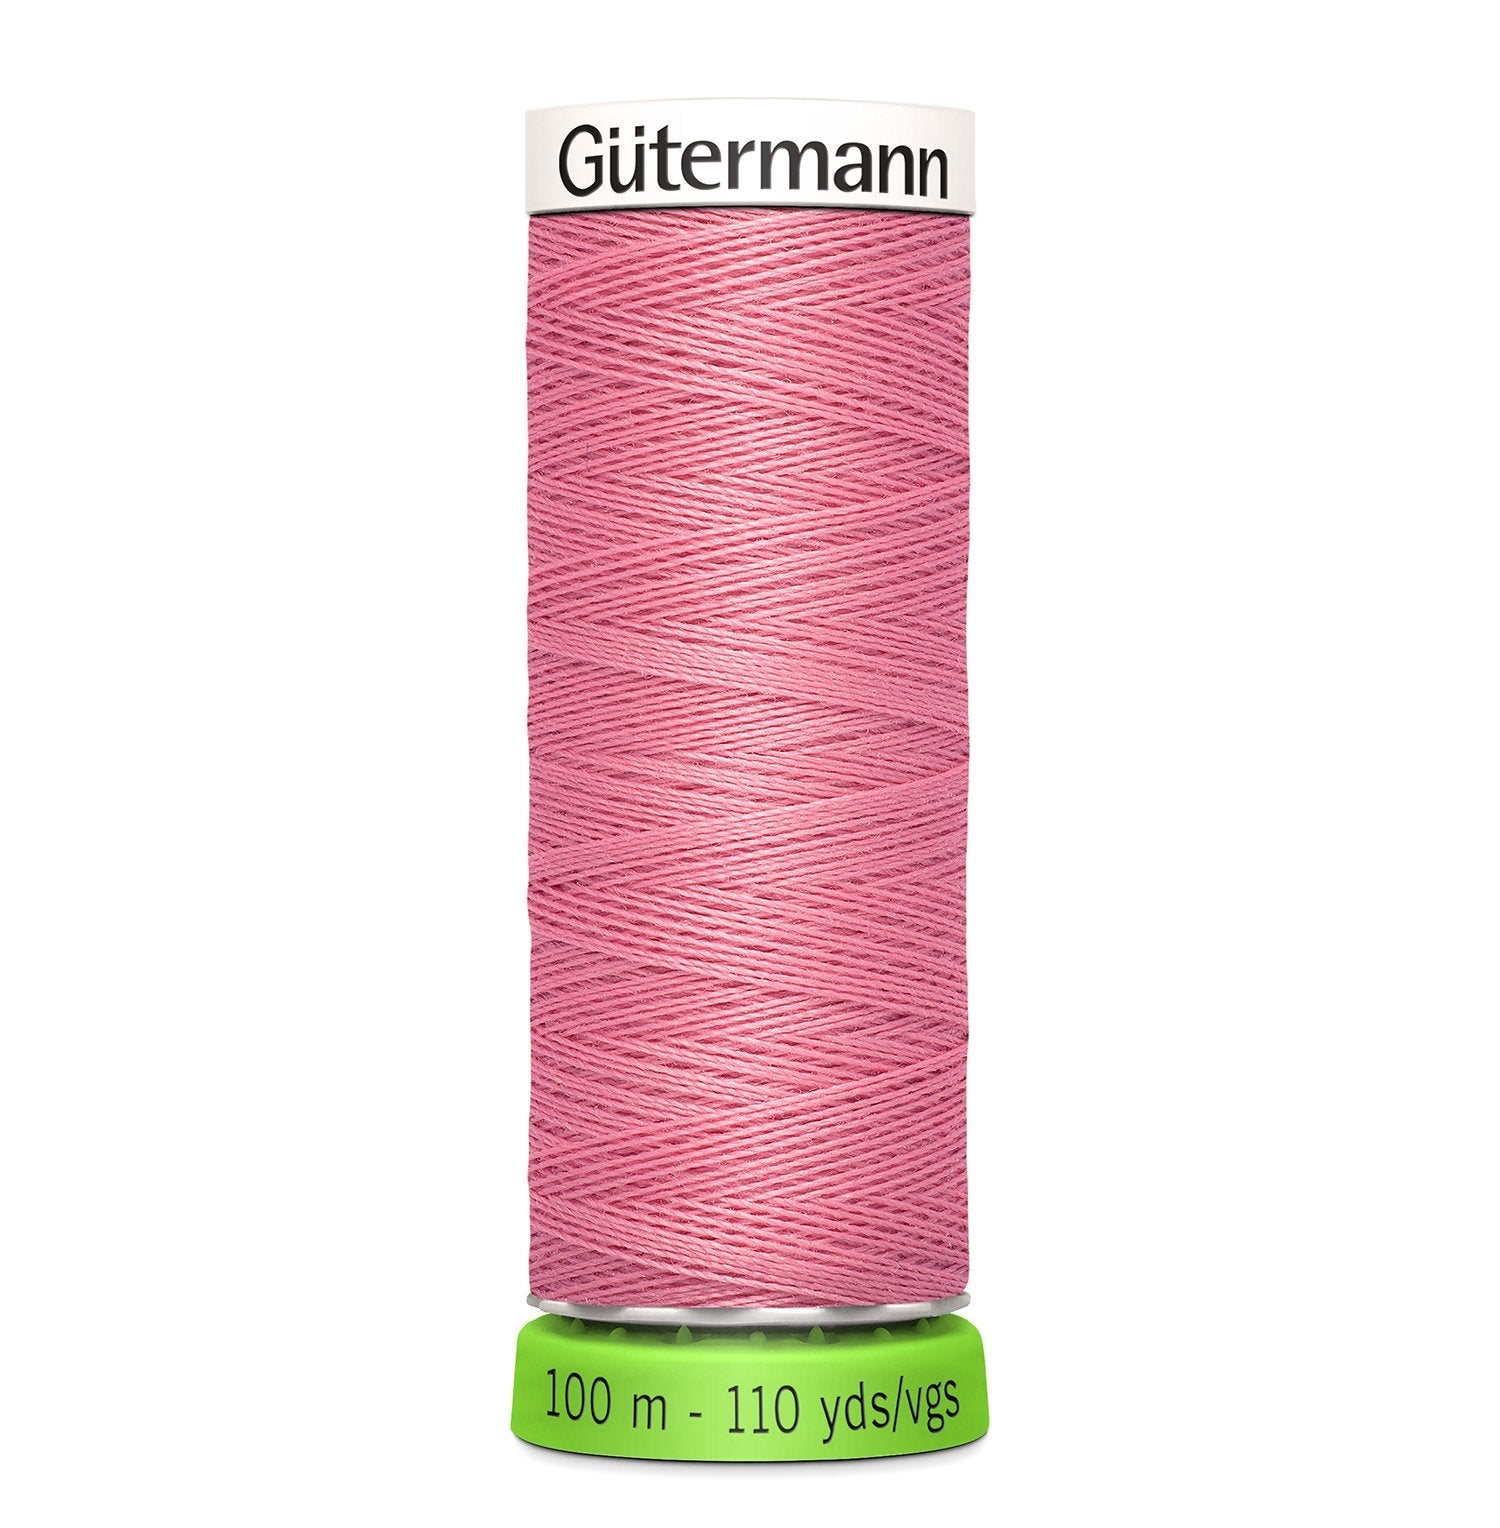 Gutermann Recycled Thread 100m, Colour 889 from Jaycotts Sewing Supplies